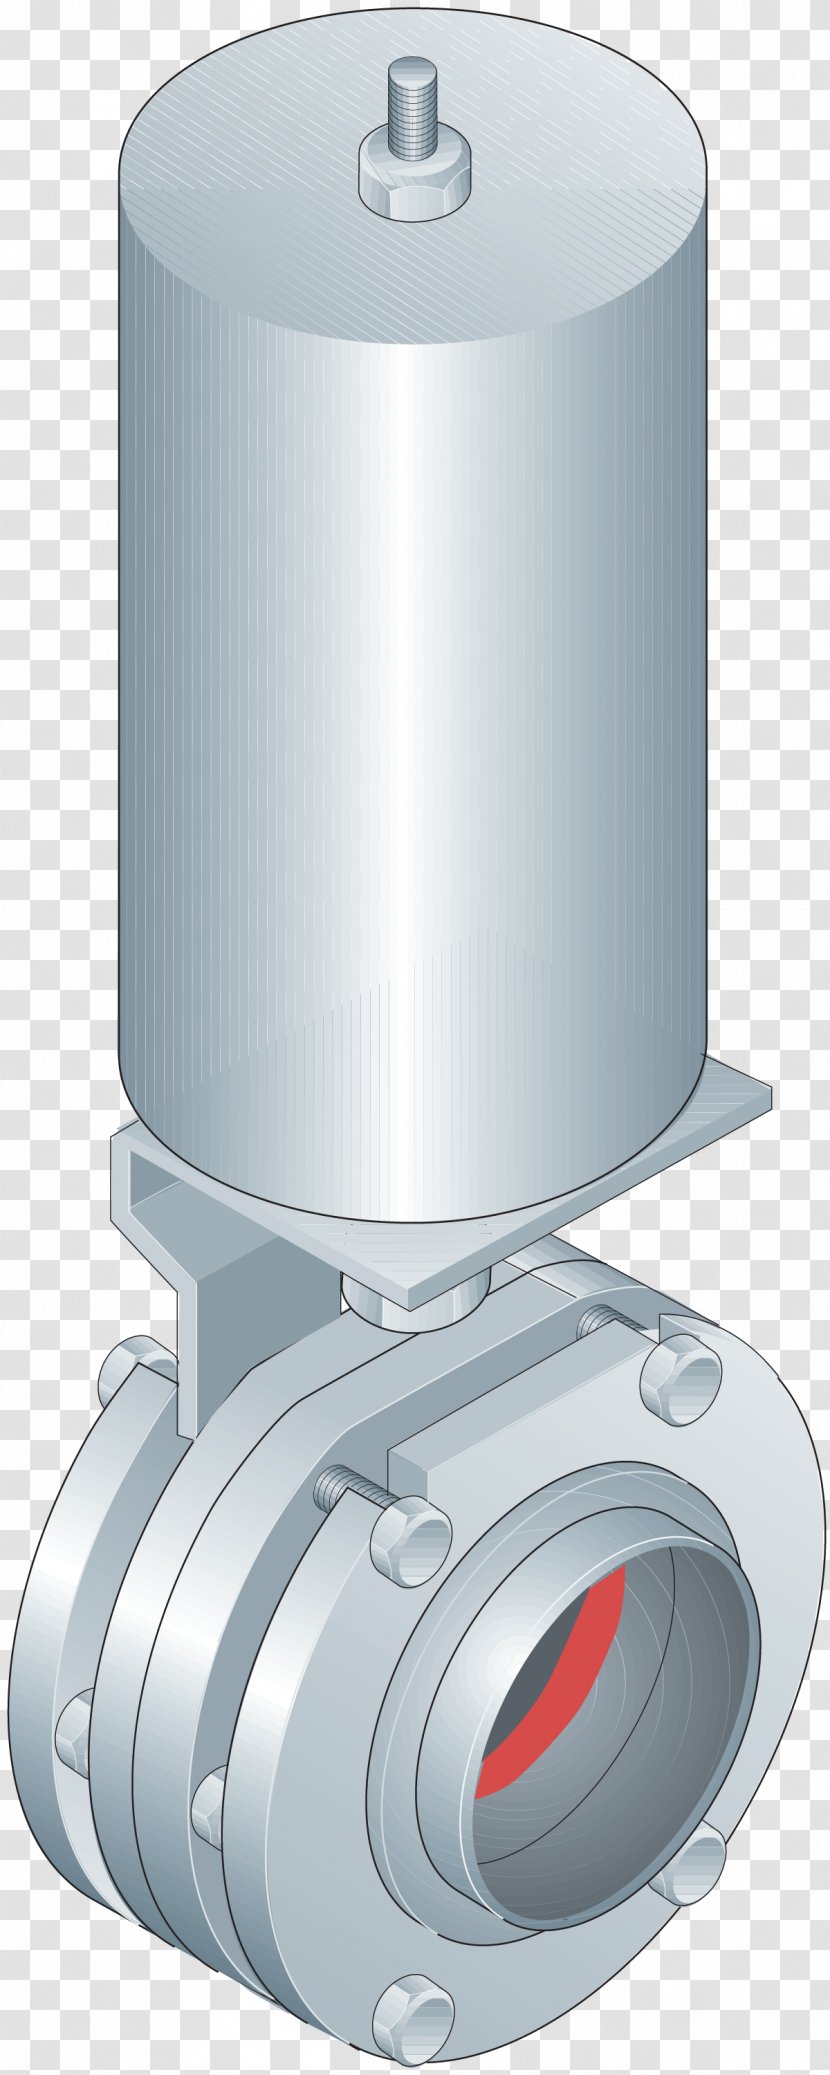 Piping And Plumbing Fitting Pipe Butterfly Valve - Cylinder Transparent PNG